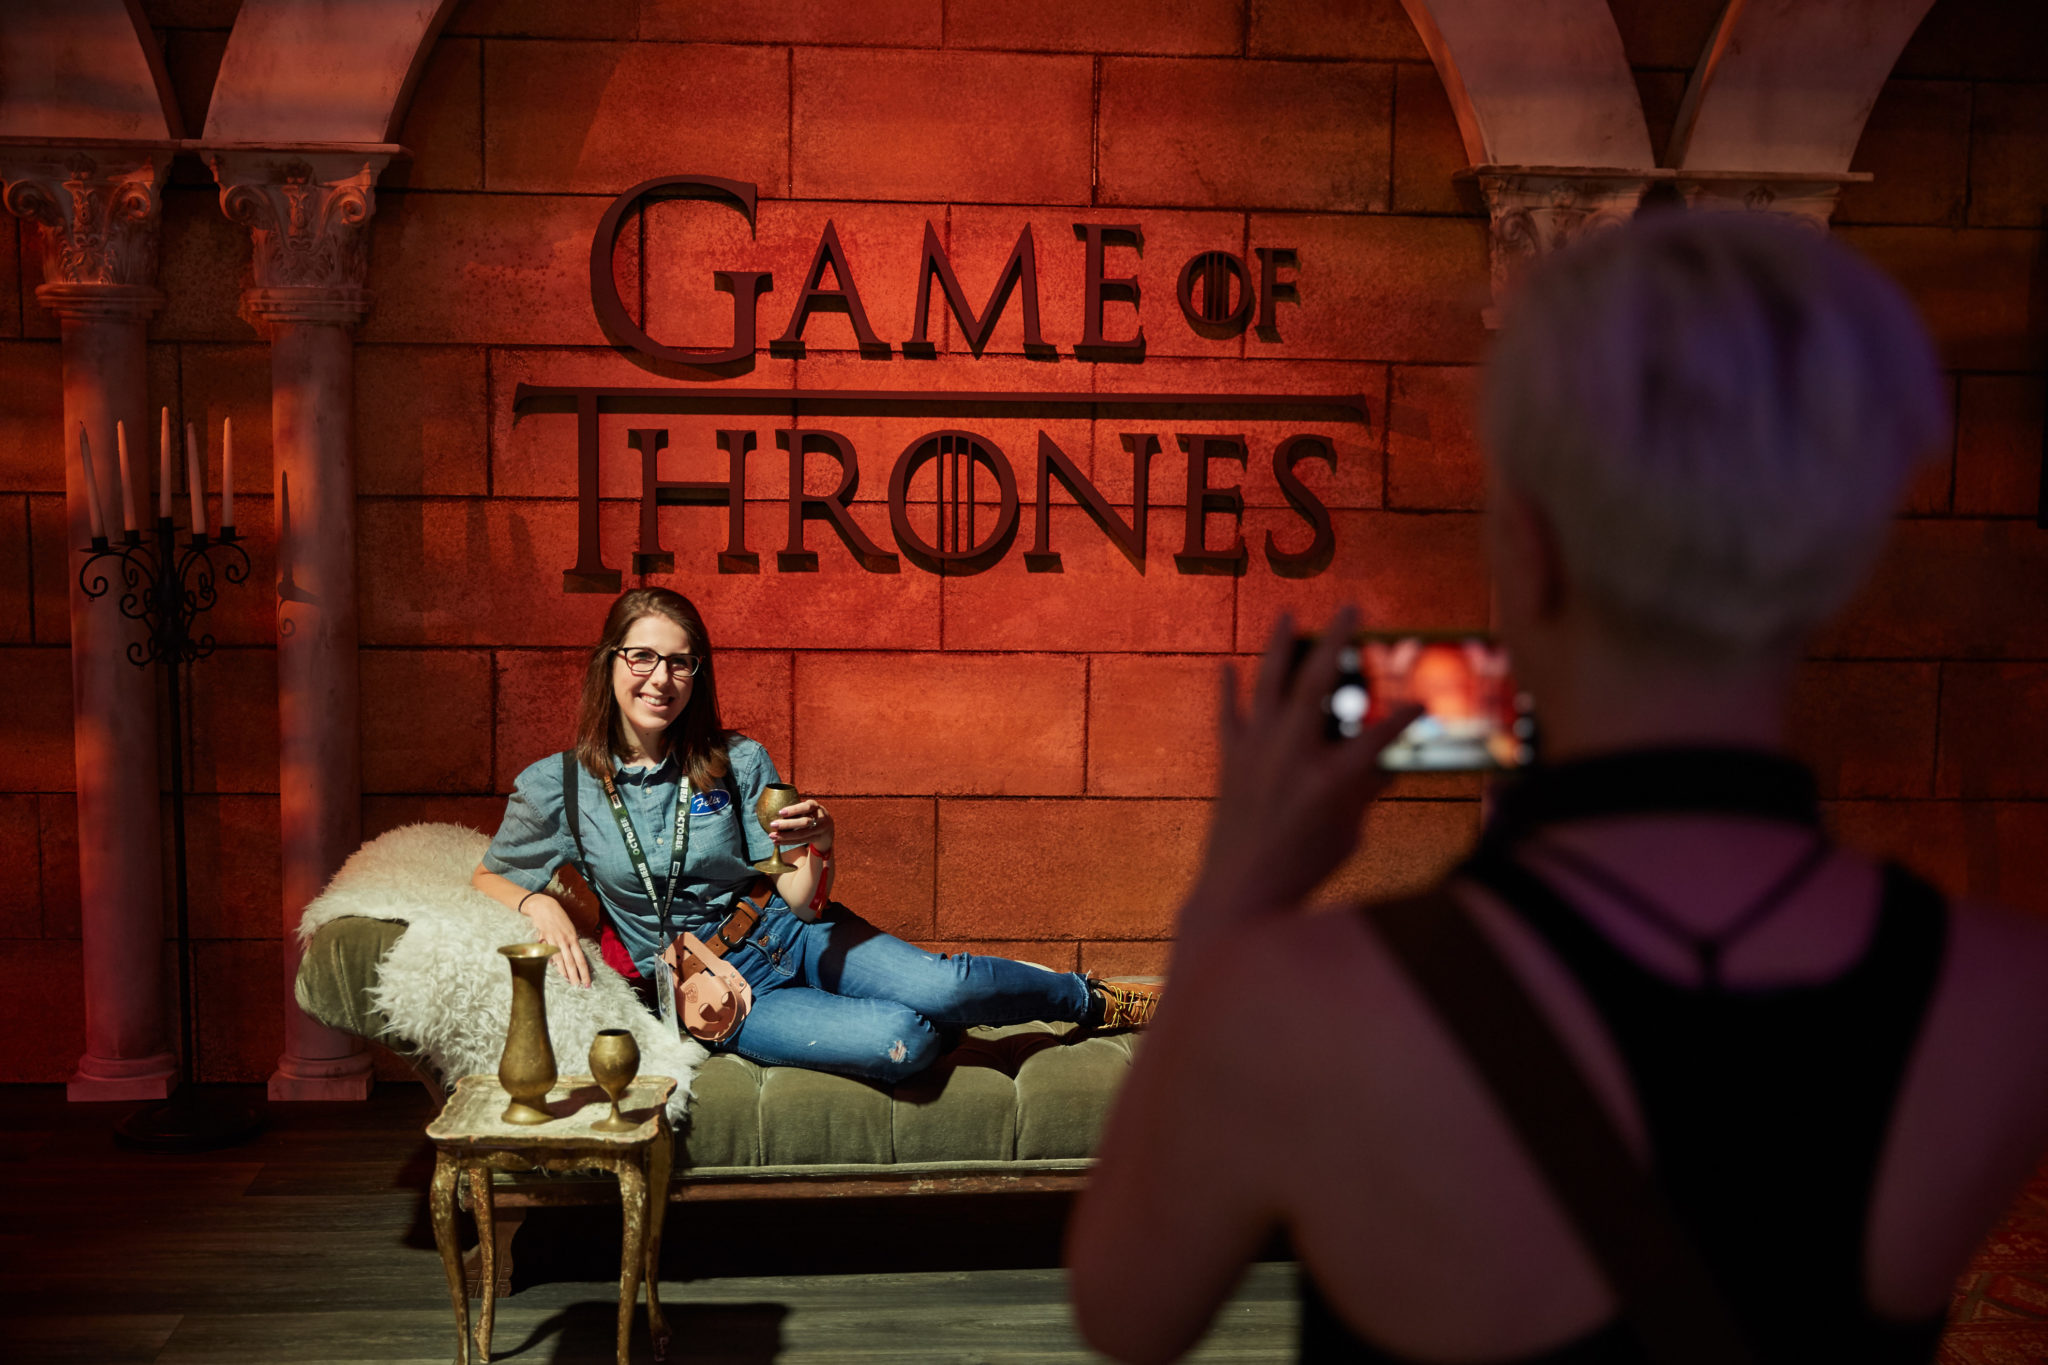 Amazon FIre TV - San Diego Comic Con 2018 Experiential Marketing Agency based in Los Angeles, California